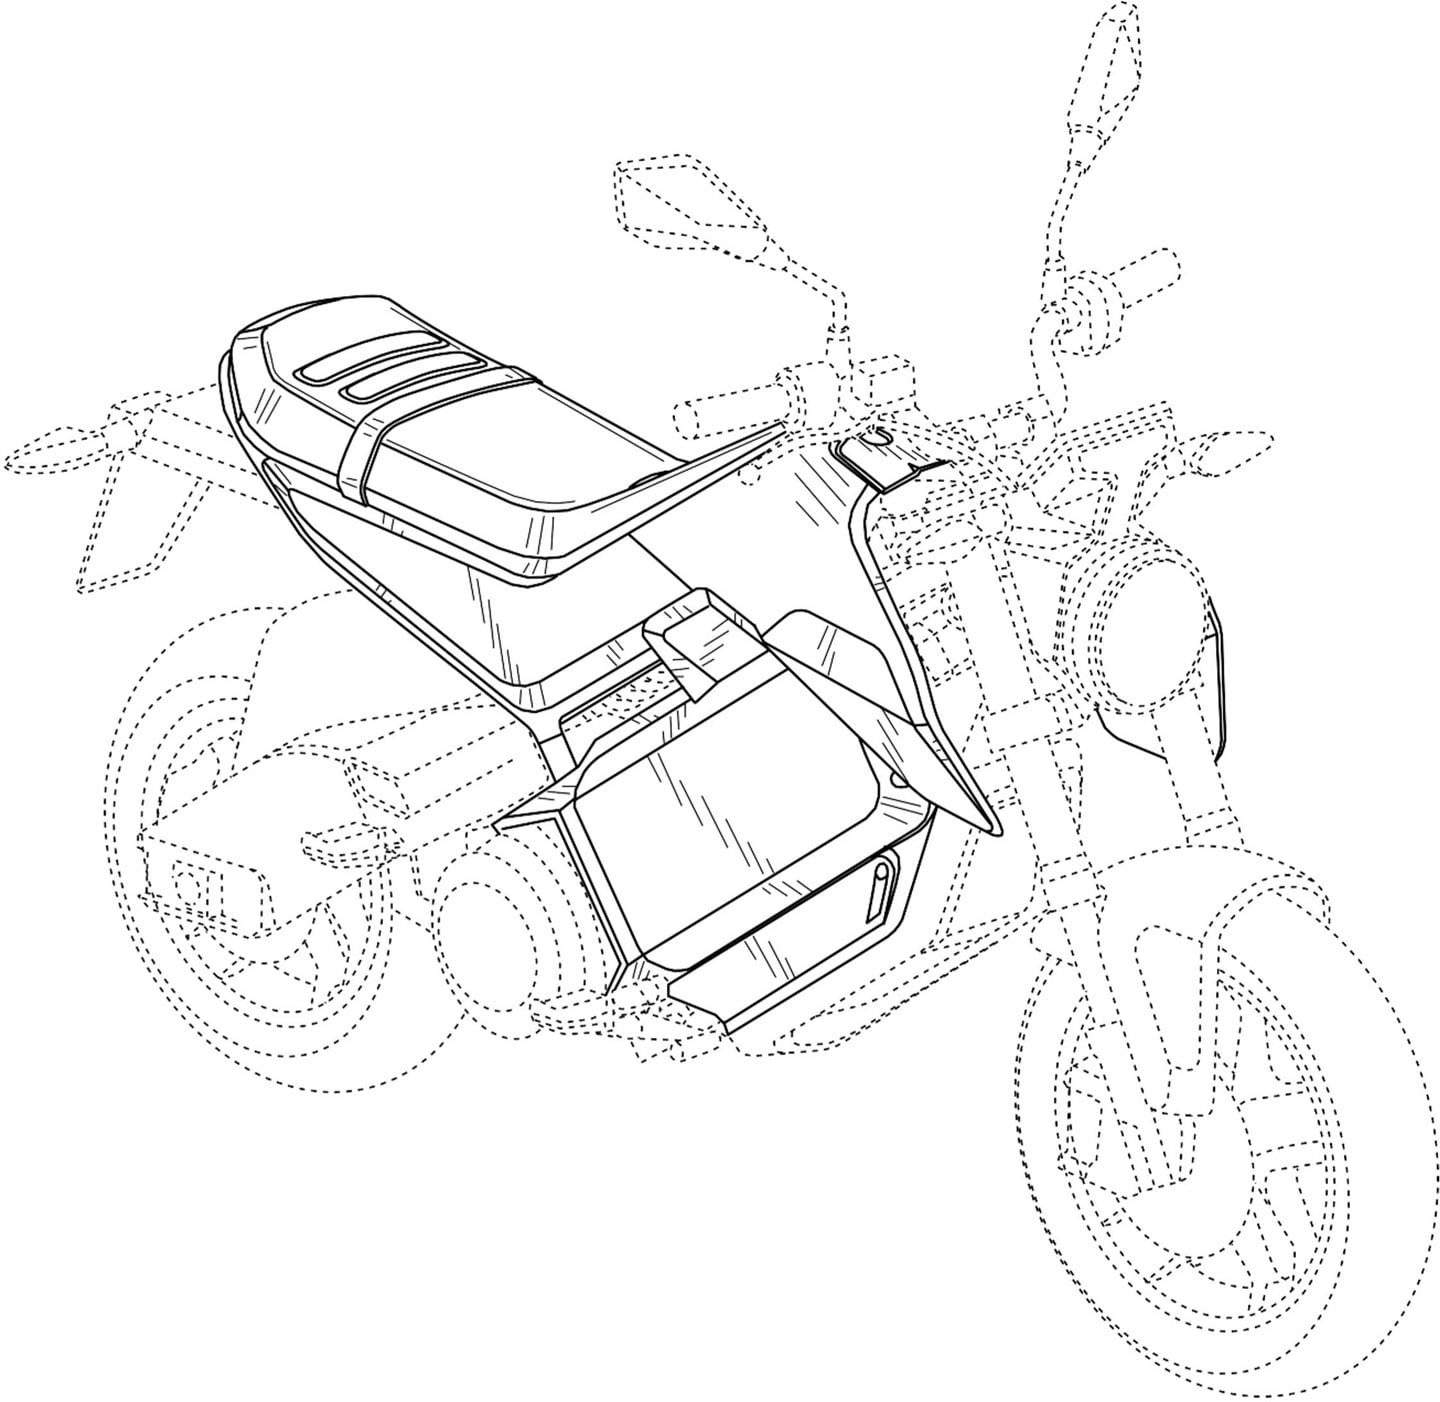 The motorcycle in these patent drawings is clearly a smaller machine like the Honda Grom.